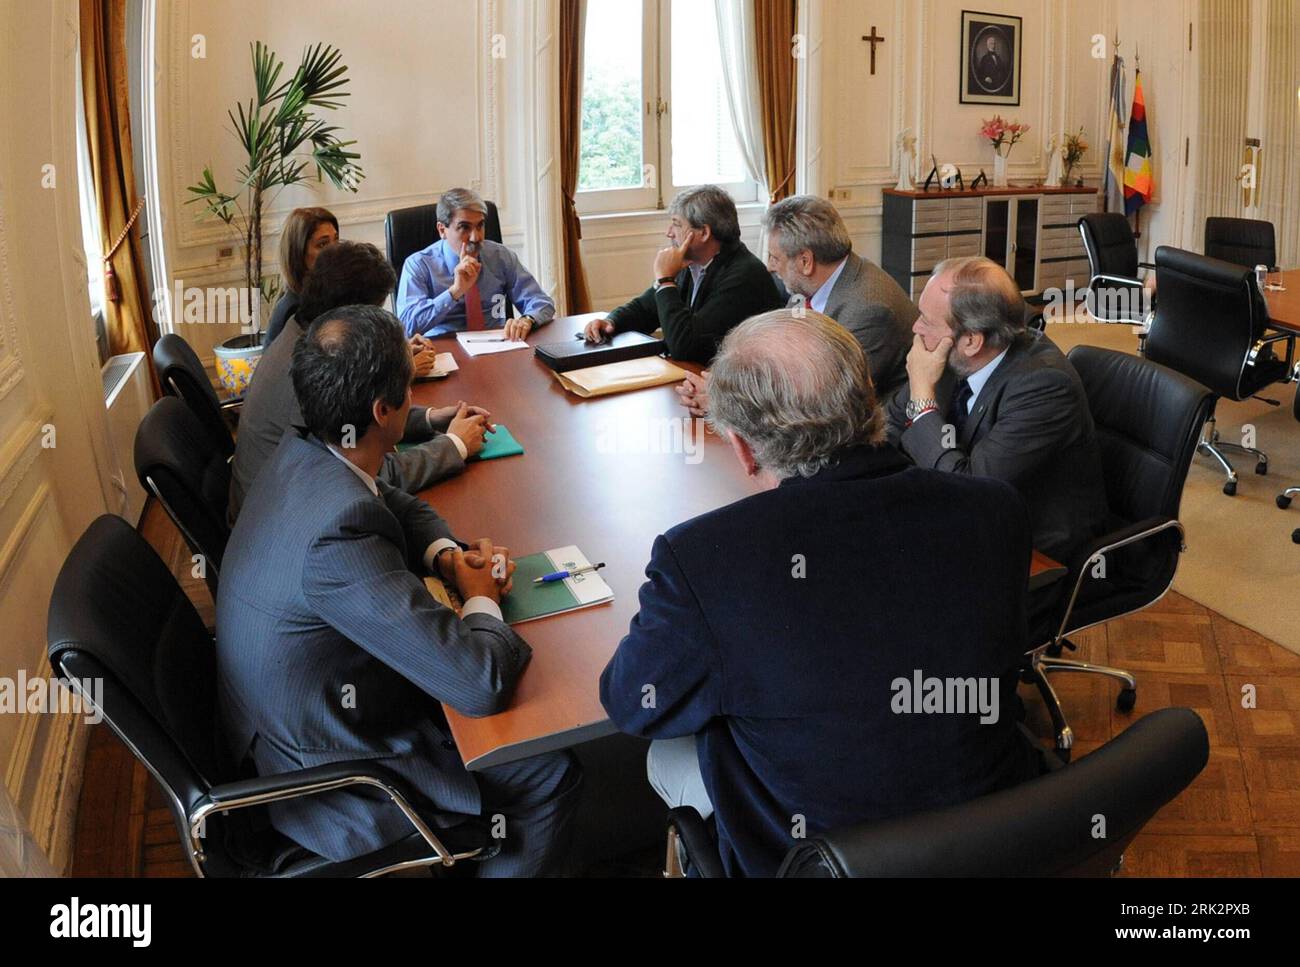 Bildnummer: 53235025  Datum: 01.08.2009  Copyright: imago/Xinhua (090801) -- BUENOS AIRES, Aug. 1, 2009 (Xinhua) -- Argentine Cabinet Chief Anibal Fernandez (Rear) talks during a meeting with representatives of farming groups in Buenos Aires, July 31, 2009. Argentina will resume its export of grains and corns, Anibal Fernandez announced after the meeting. (Xinhua/Telenoticiosa Americana) (zx) ARGENTINA-BUENOS AIRES-AGRICULTURE-EXPORT  PUBLICATIONxNOTxINxCHN  People Politik Argentinien Kabinett kbdig xsk  2009 quer     Image number 53235025 Date 01 08 2009 Copyright Imago XINHUA 090801 Buenos A Stock Photo